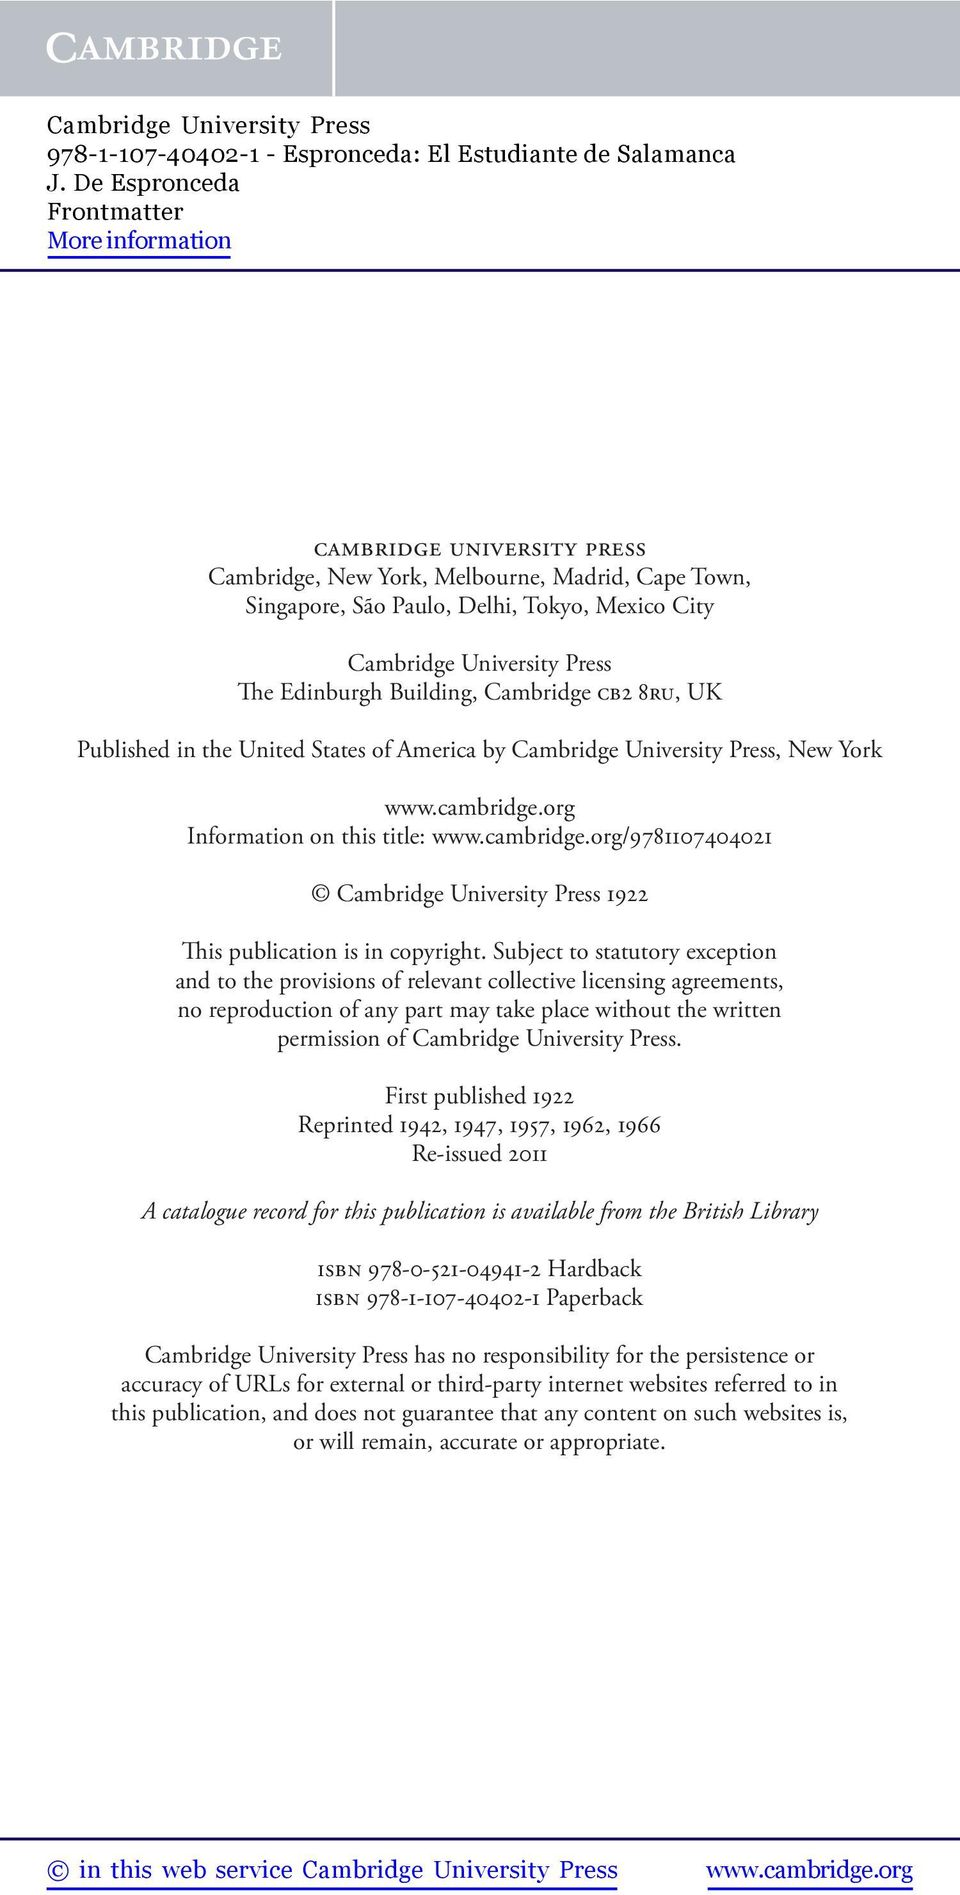 Subject to statutory exception and to the provisions of relevant collective licensing agreements, no reproduction of any part may take place without the written permission of Cambridge University